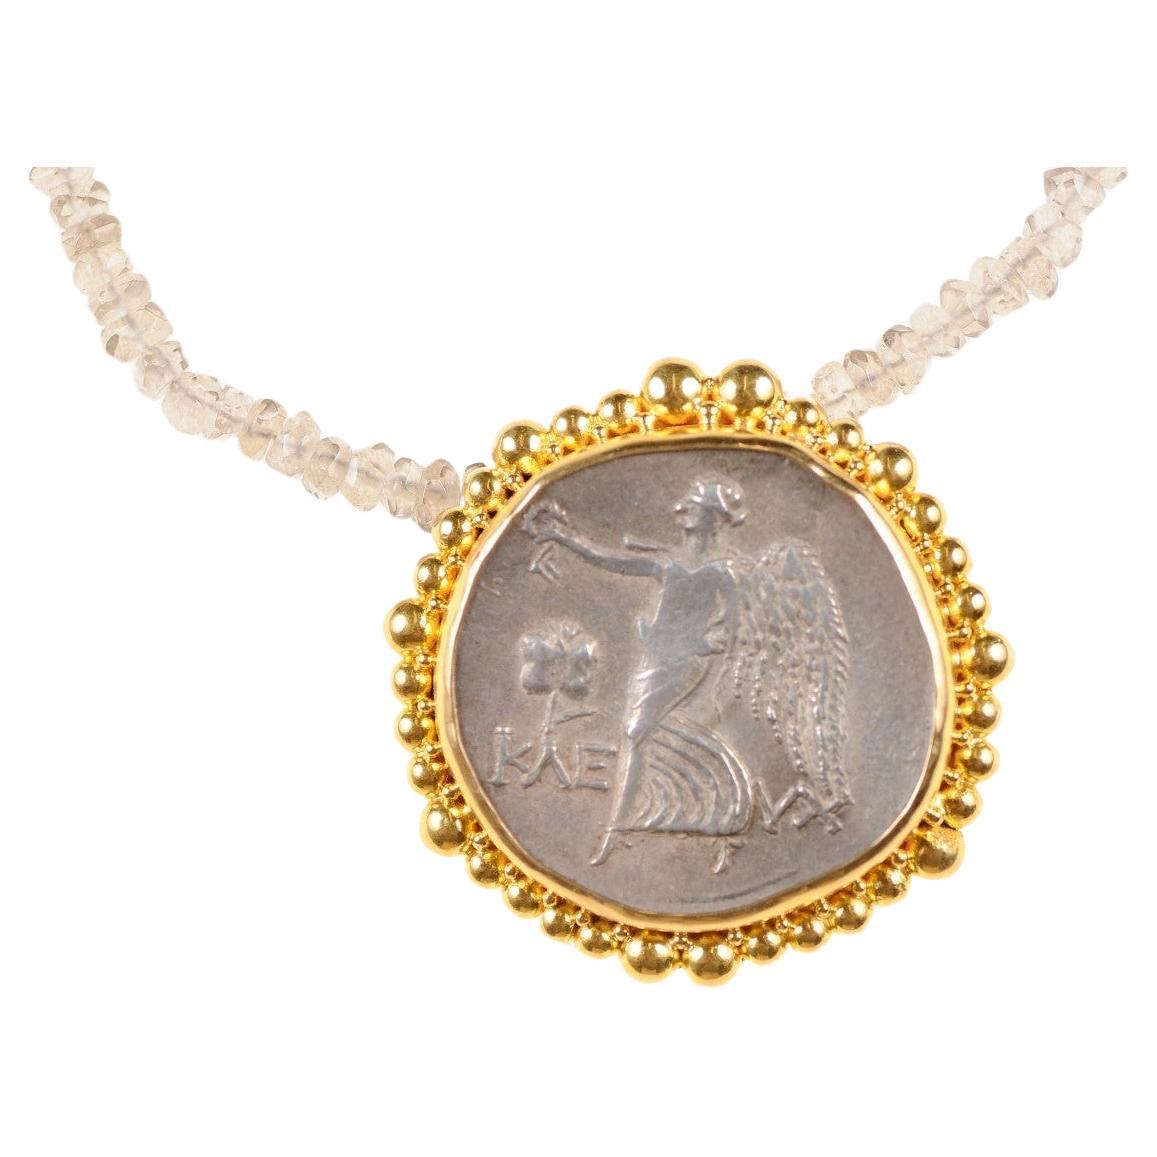 Ancient Greek Coin in 22k Gold Pendant (pendant only)